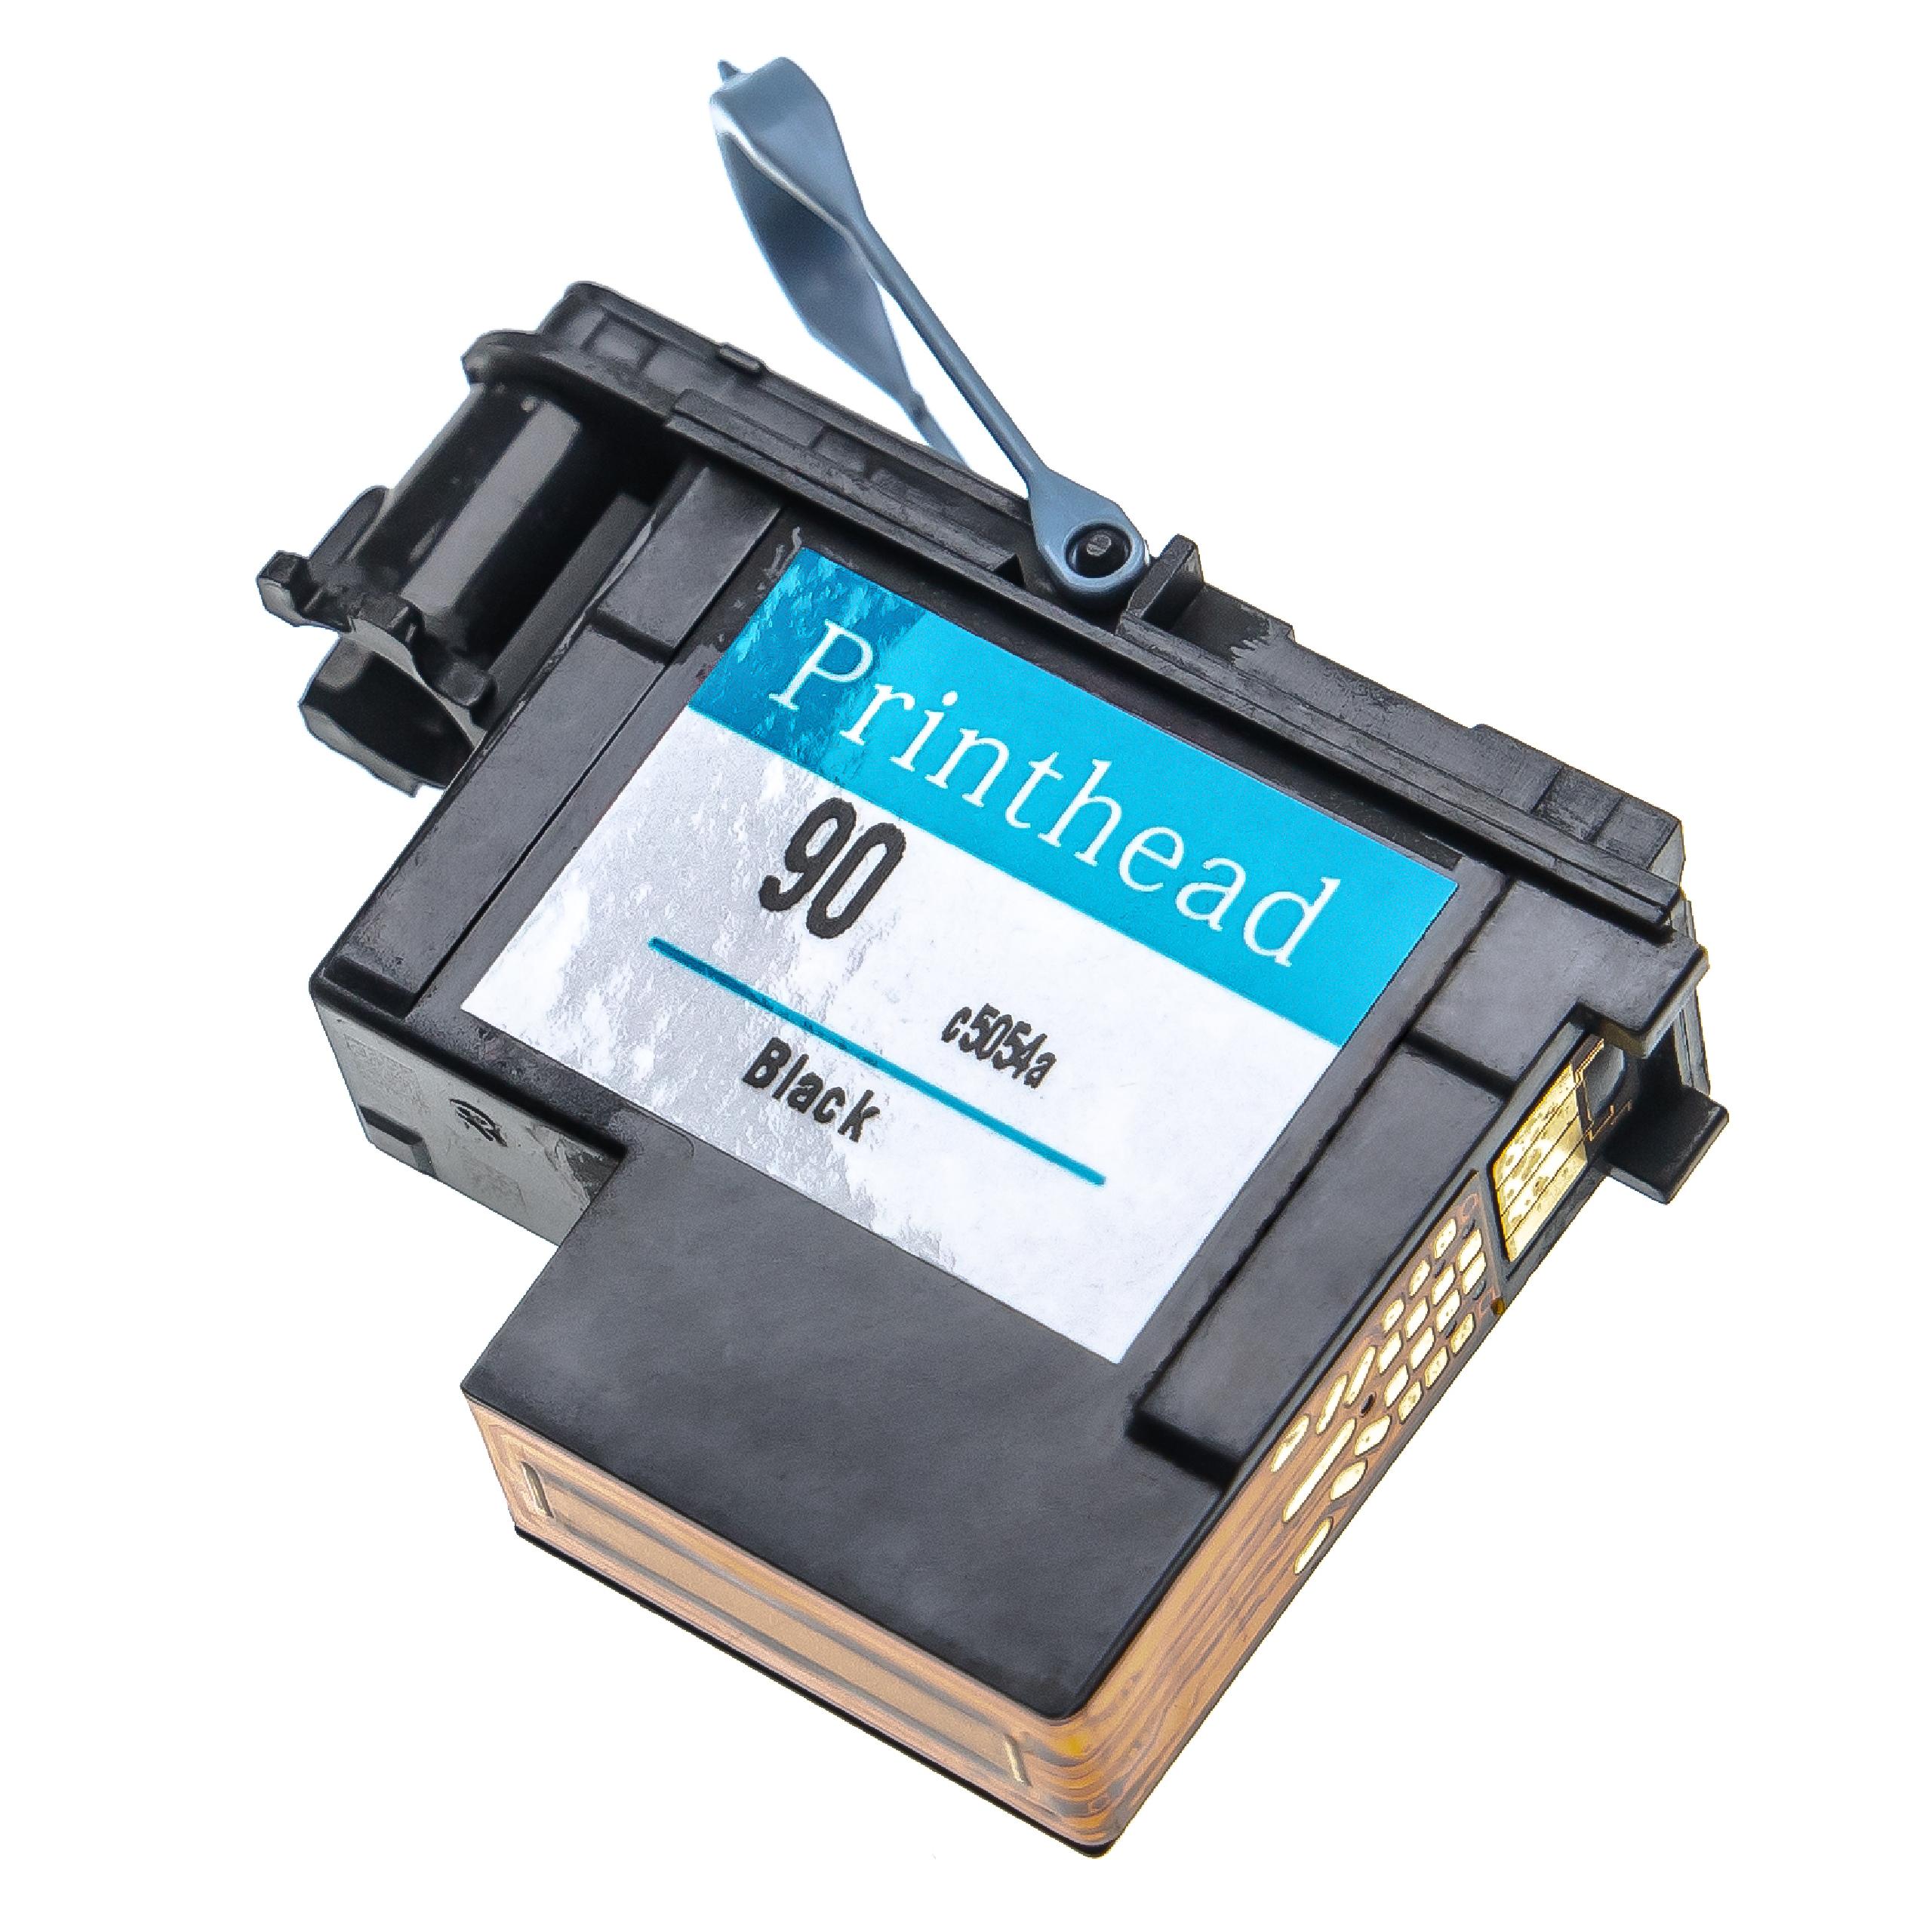 Printhead for HP DesignJet HP C5054A Printer - black, 6 cm wide, Refurbished, With Cleaner